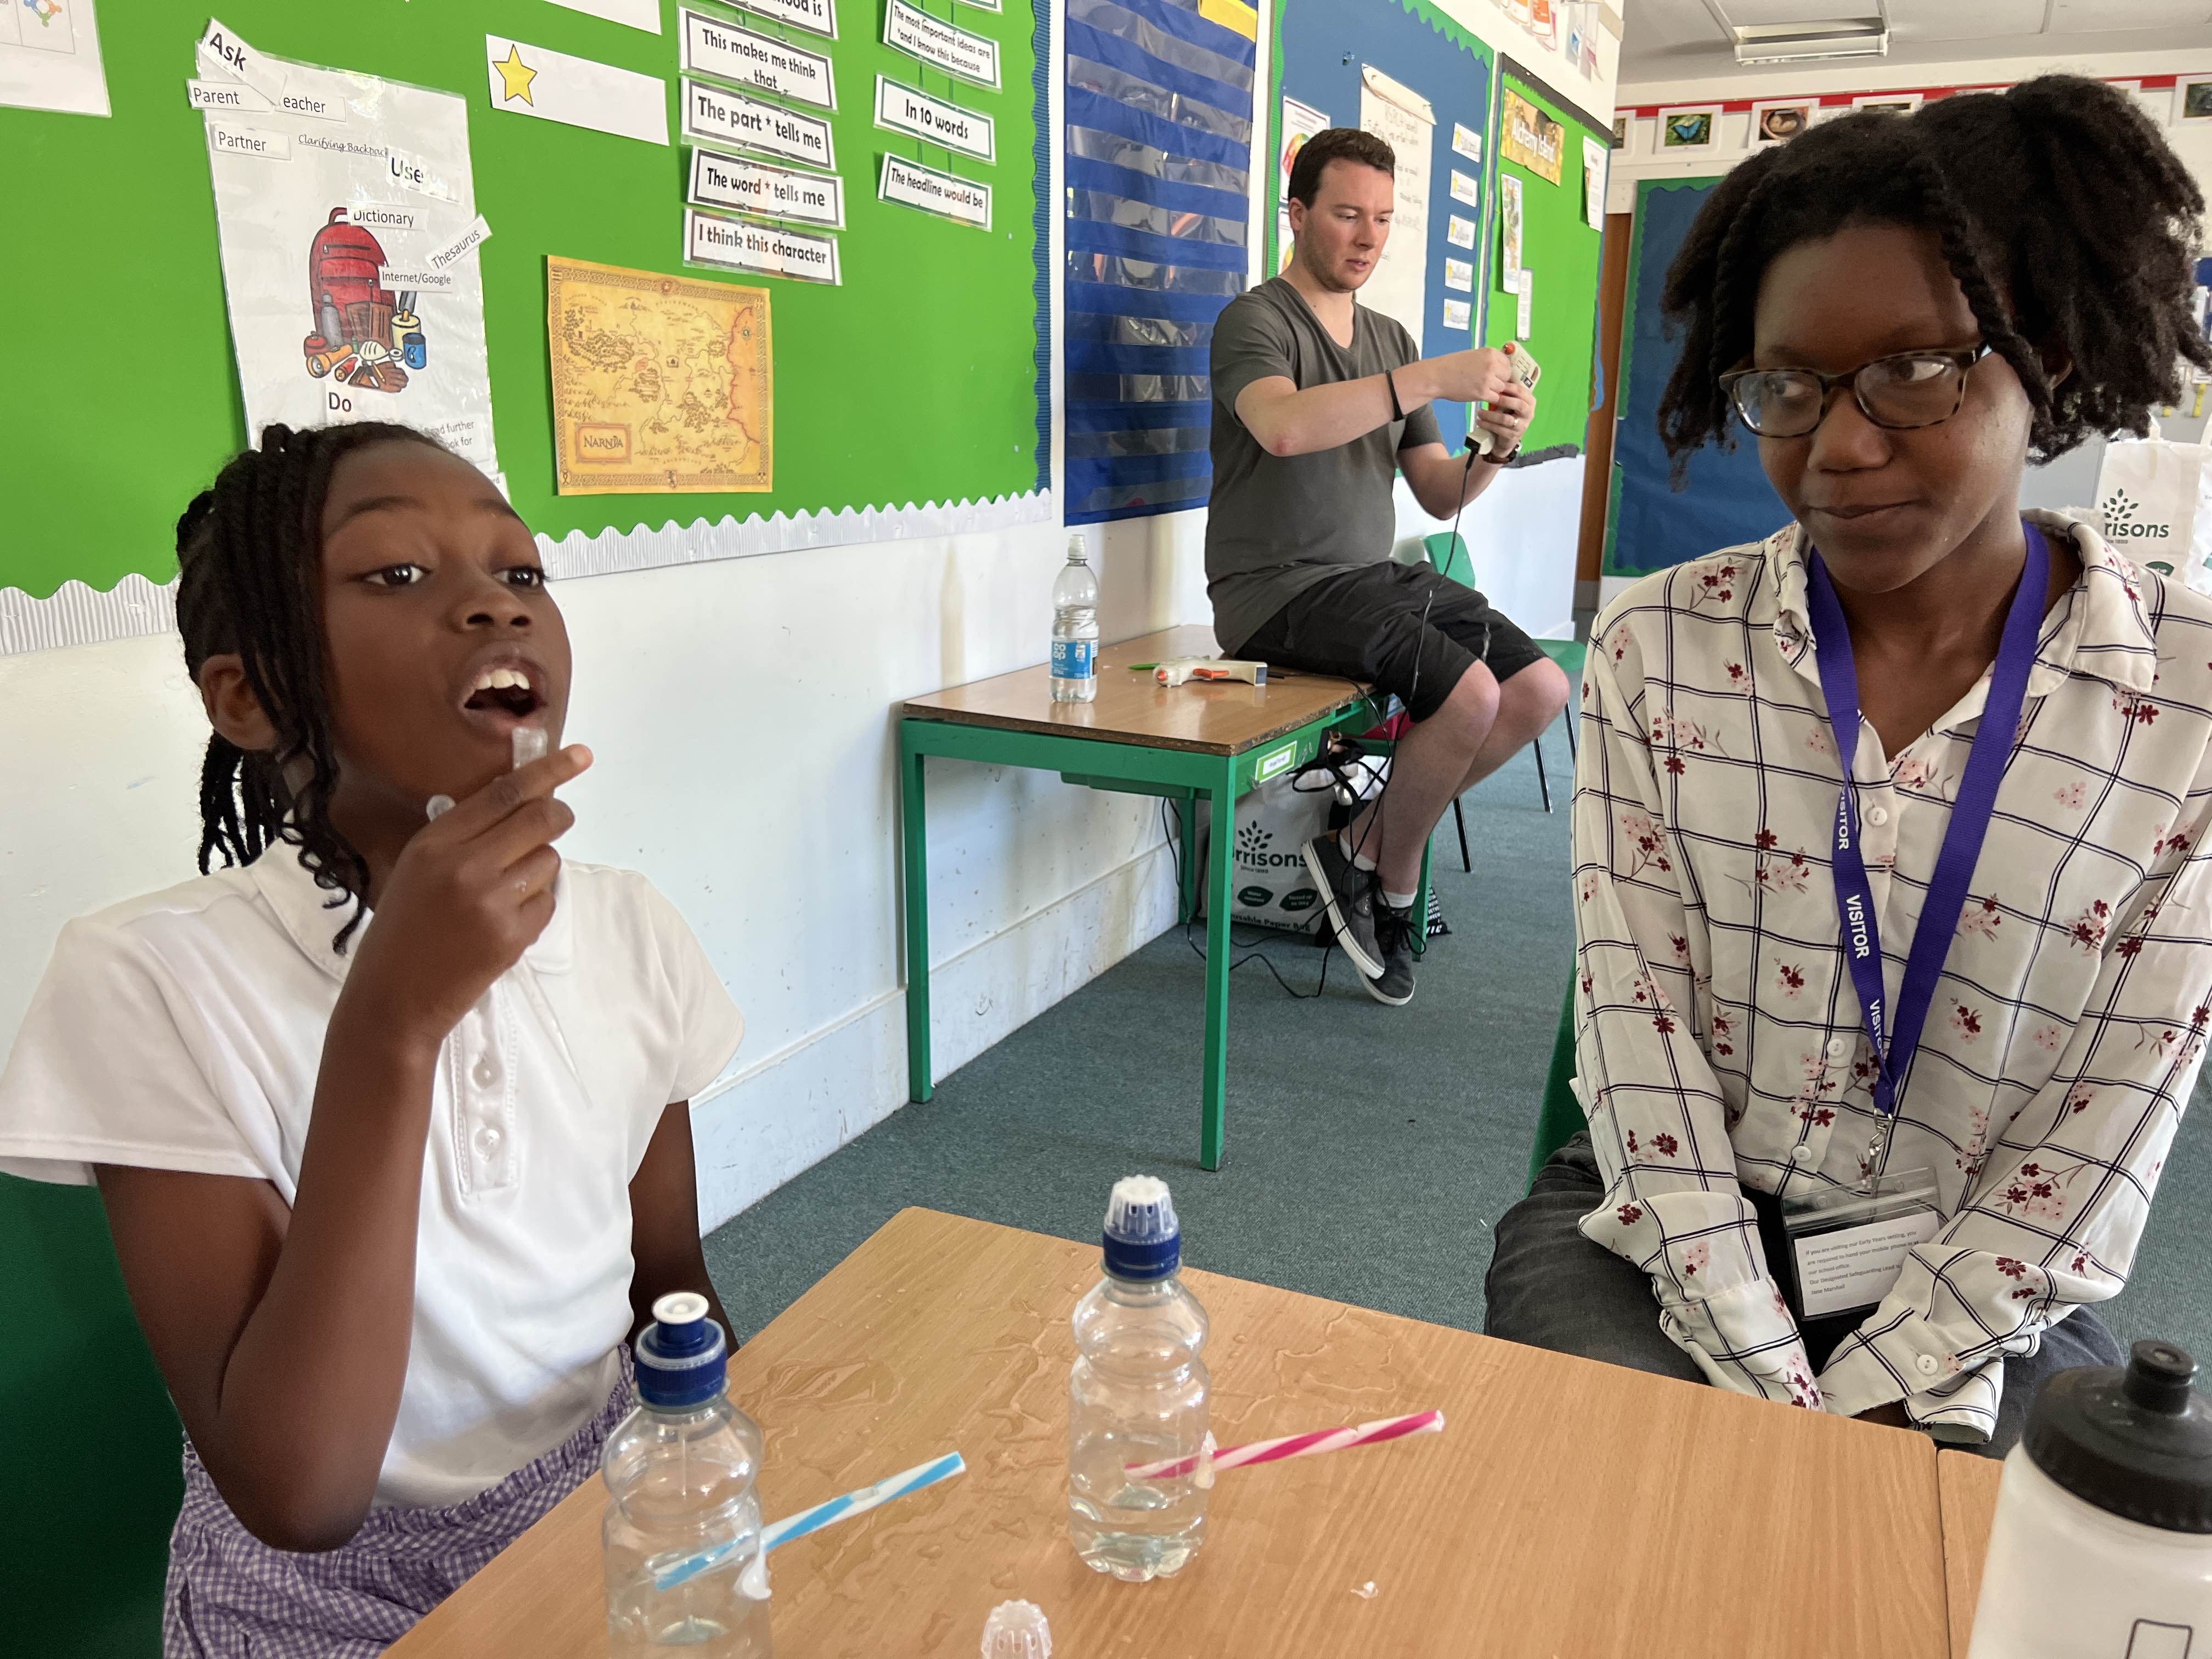 This image shows two teachers sitting with a Year 4 student who is blowing a bird whistle they made.